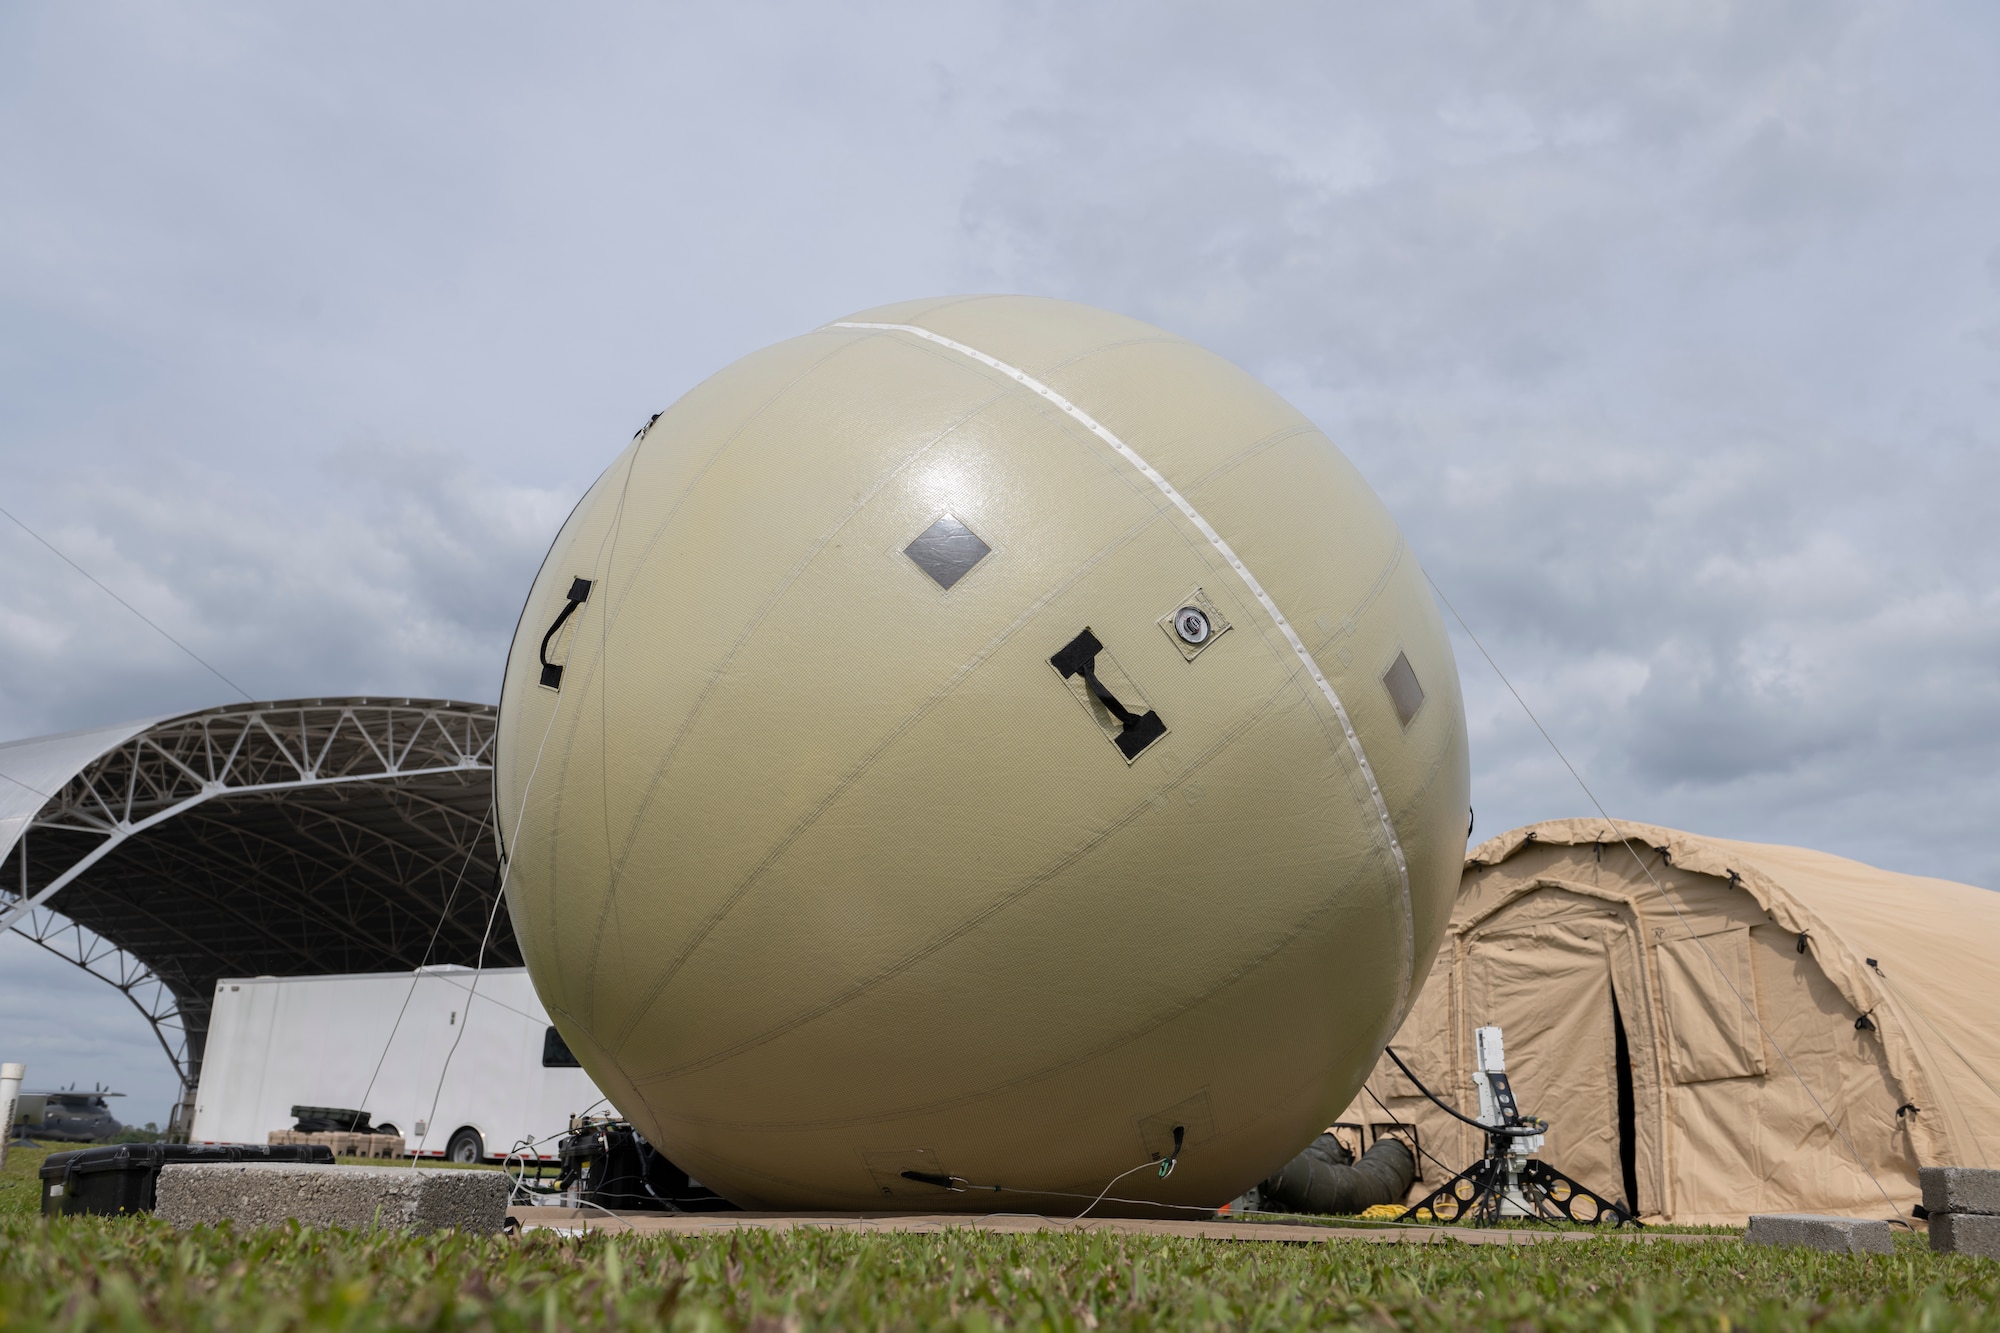 A ground antenna transmit and receive (GATR) ball, assigned to the 51st Combat Communications Squadron, provides network capabilities for Exercise Ready Tiger 24-1 at Avon Park Air Force Range, Florida, April 9, 2024. The GATR ball was used during Ready Tiger 24-1 to transmit data communication between personnel in geographically separated areas. Built upon Air Combat Command's directive to assert air power in contested environments, Exercise Ready Tiger 24-1 aims to test and enhance the 23rd Wing’s proficiency in executing Lead Wing and Expeditionary Air Base concepts through Agile Combat Employment and command and control operations. (U.S. Air Force photo by Senior Airman Rachel Coates)